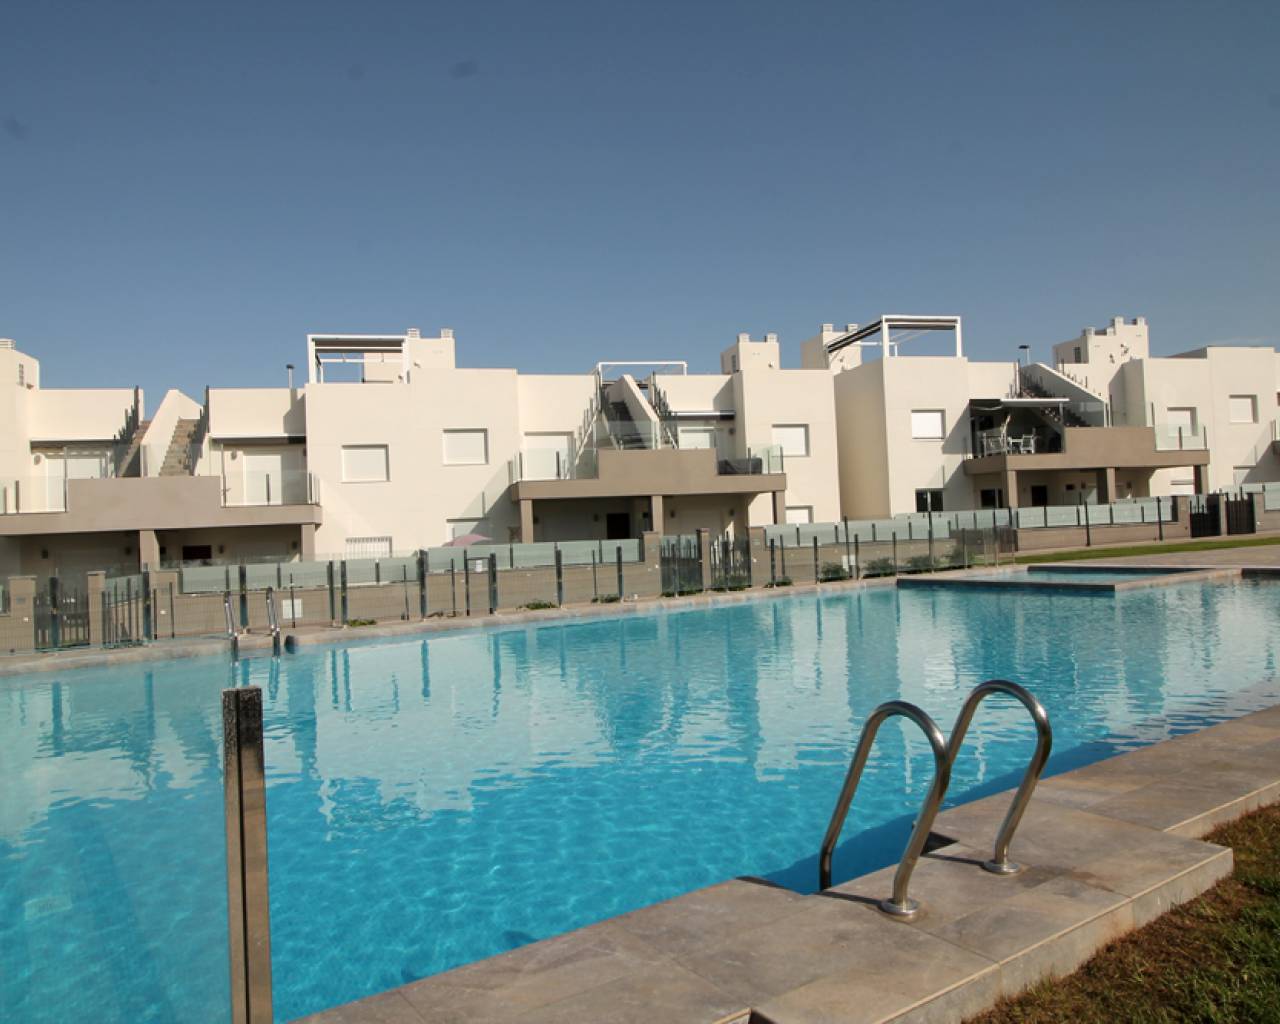 Spacious ground floor apartment for holiday rental in Torrevieja, Spain